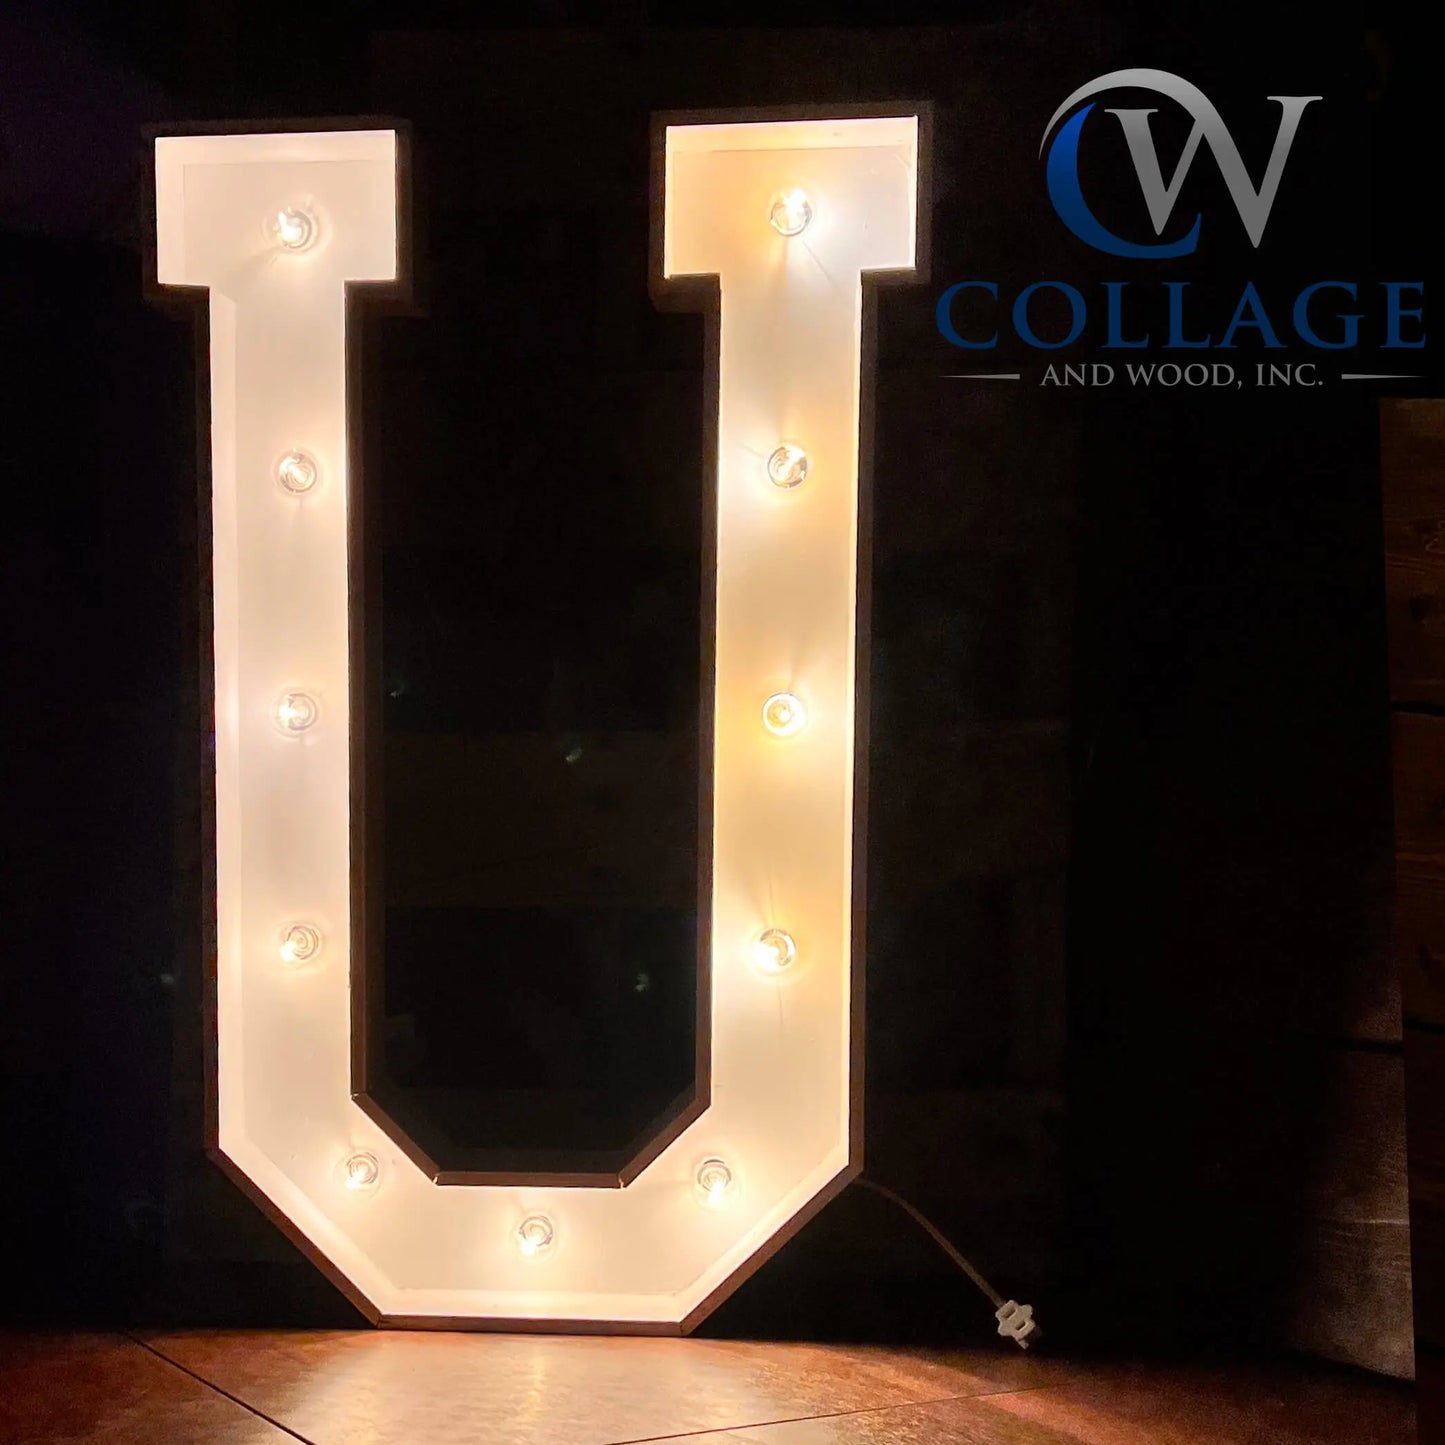 U - Unforgettable 3-foot tall wooden marquee letter U, painted in a fresh white hue, featuring brilliant battery-powered LED lights.